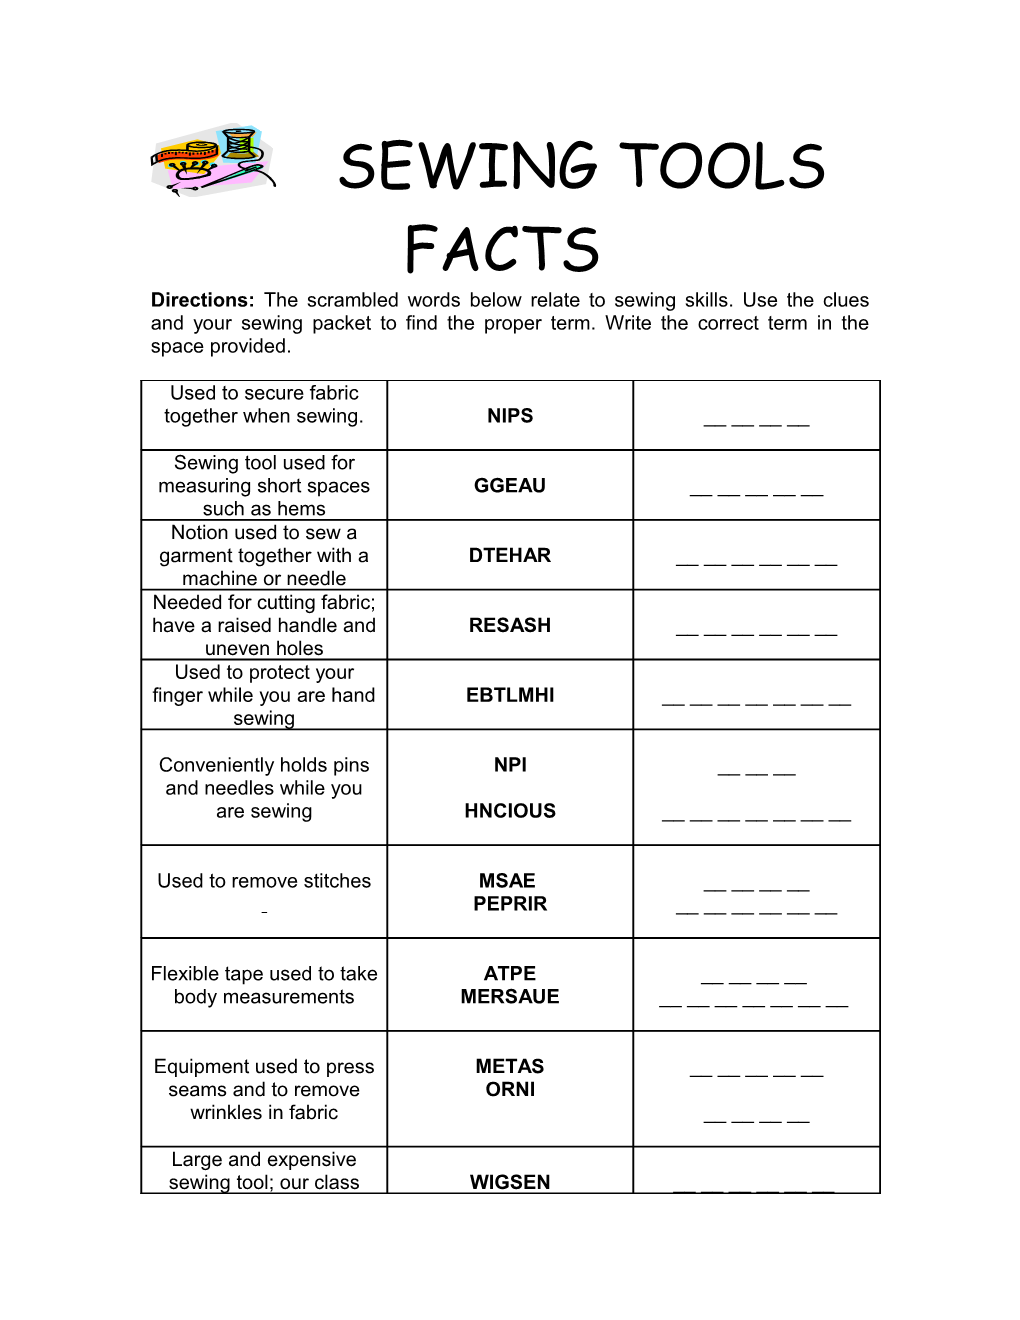 Sewing Tools Facts